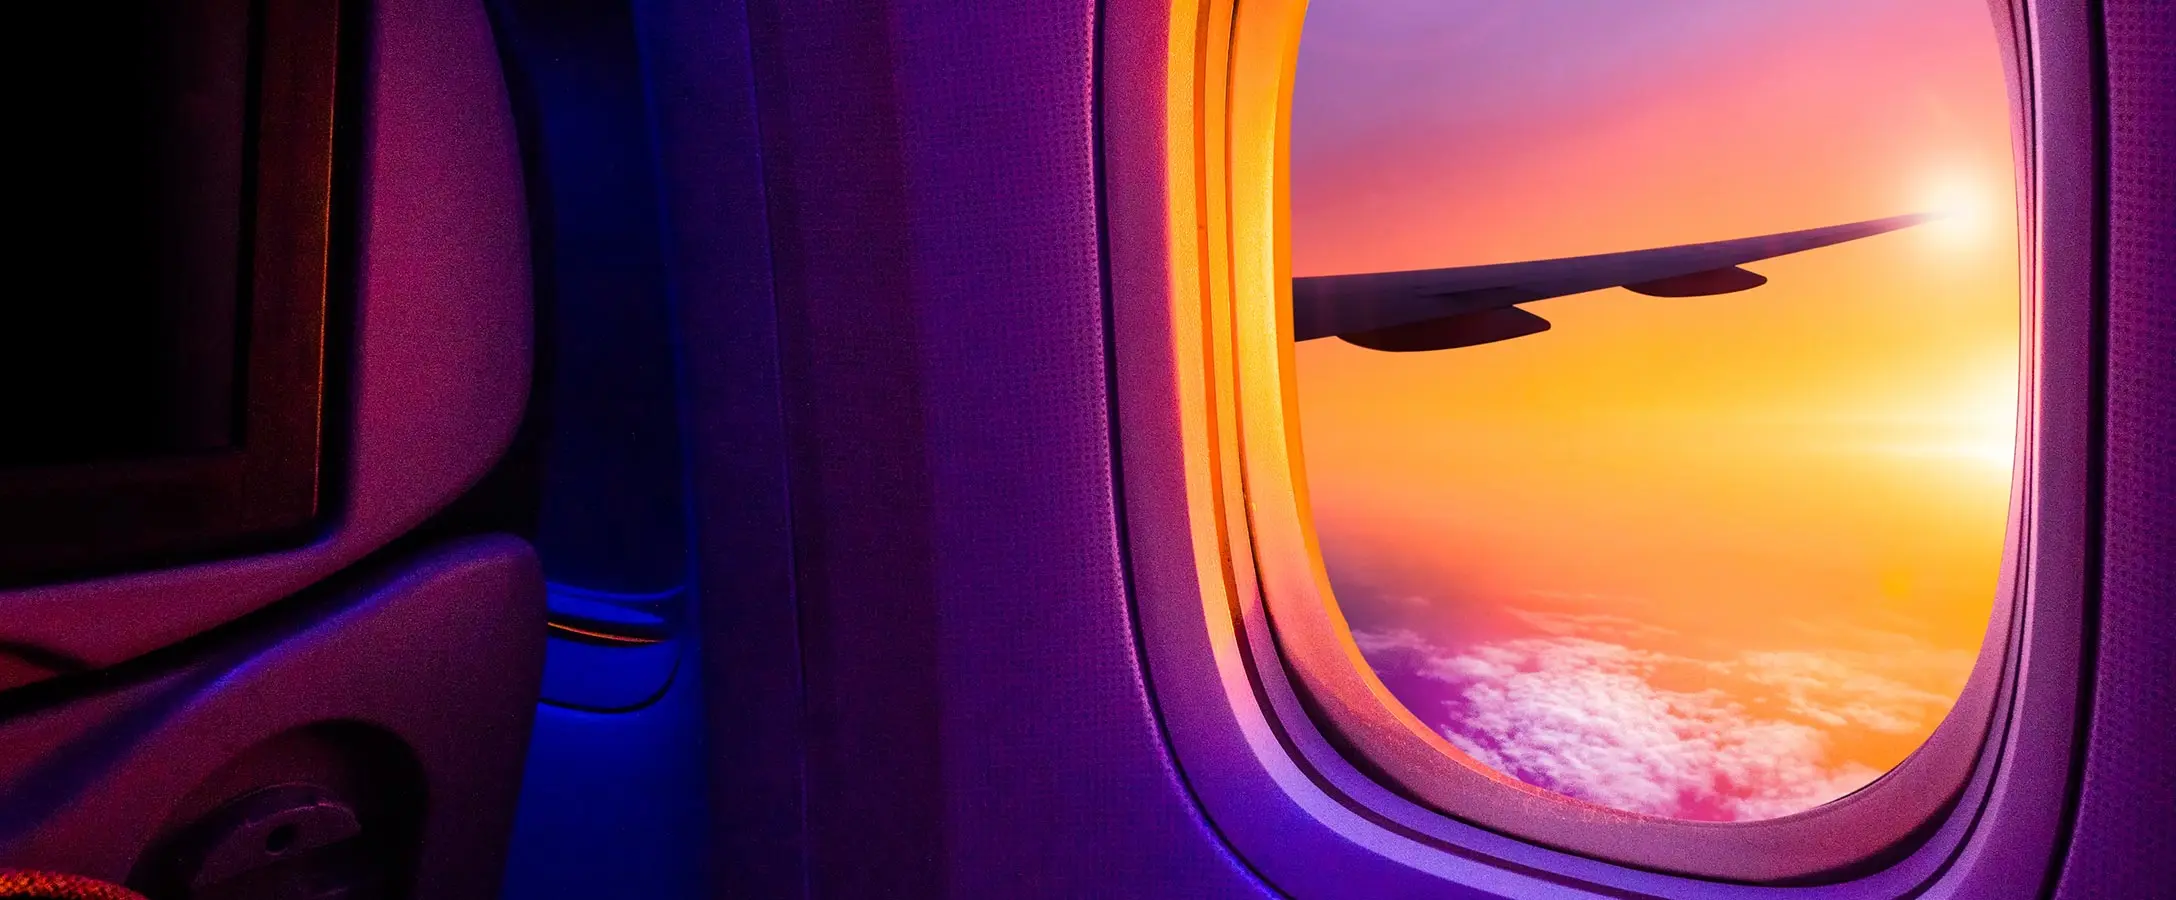 The view of a sunset from an airplane window.